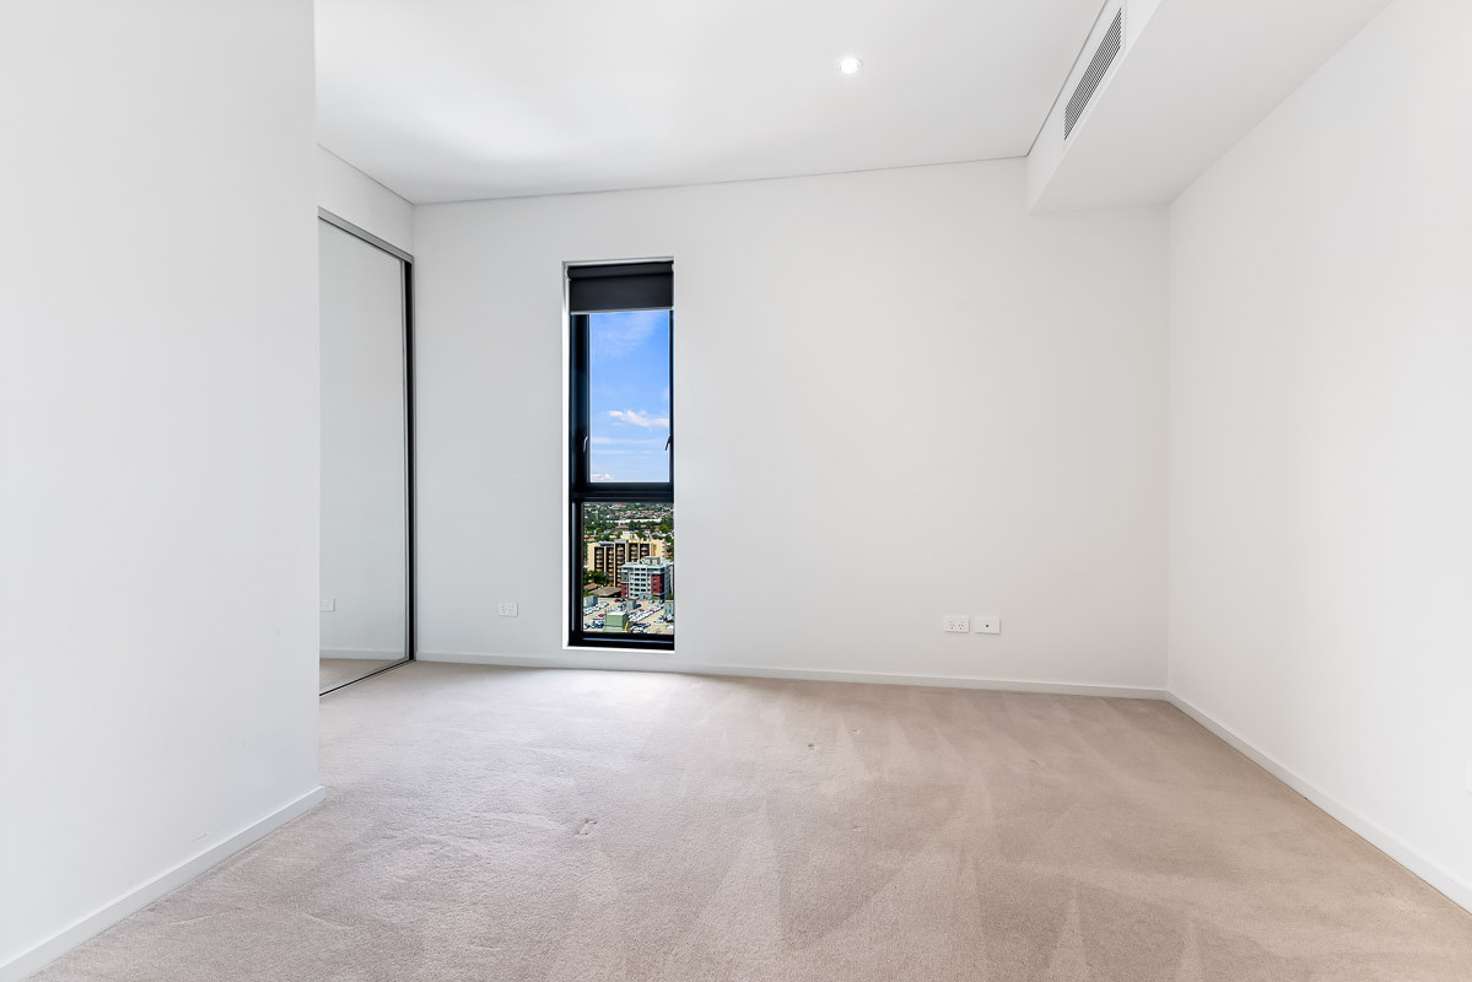 Main view of Homely apartment listing, 2514/45 Macquarie Street, Parramatta NSW 2150